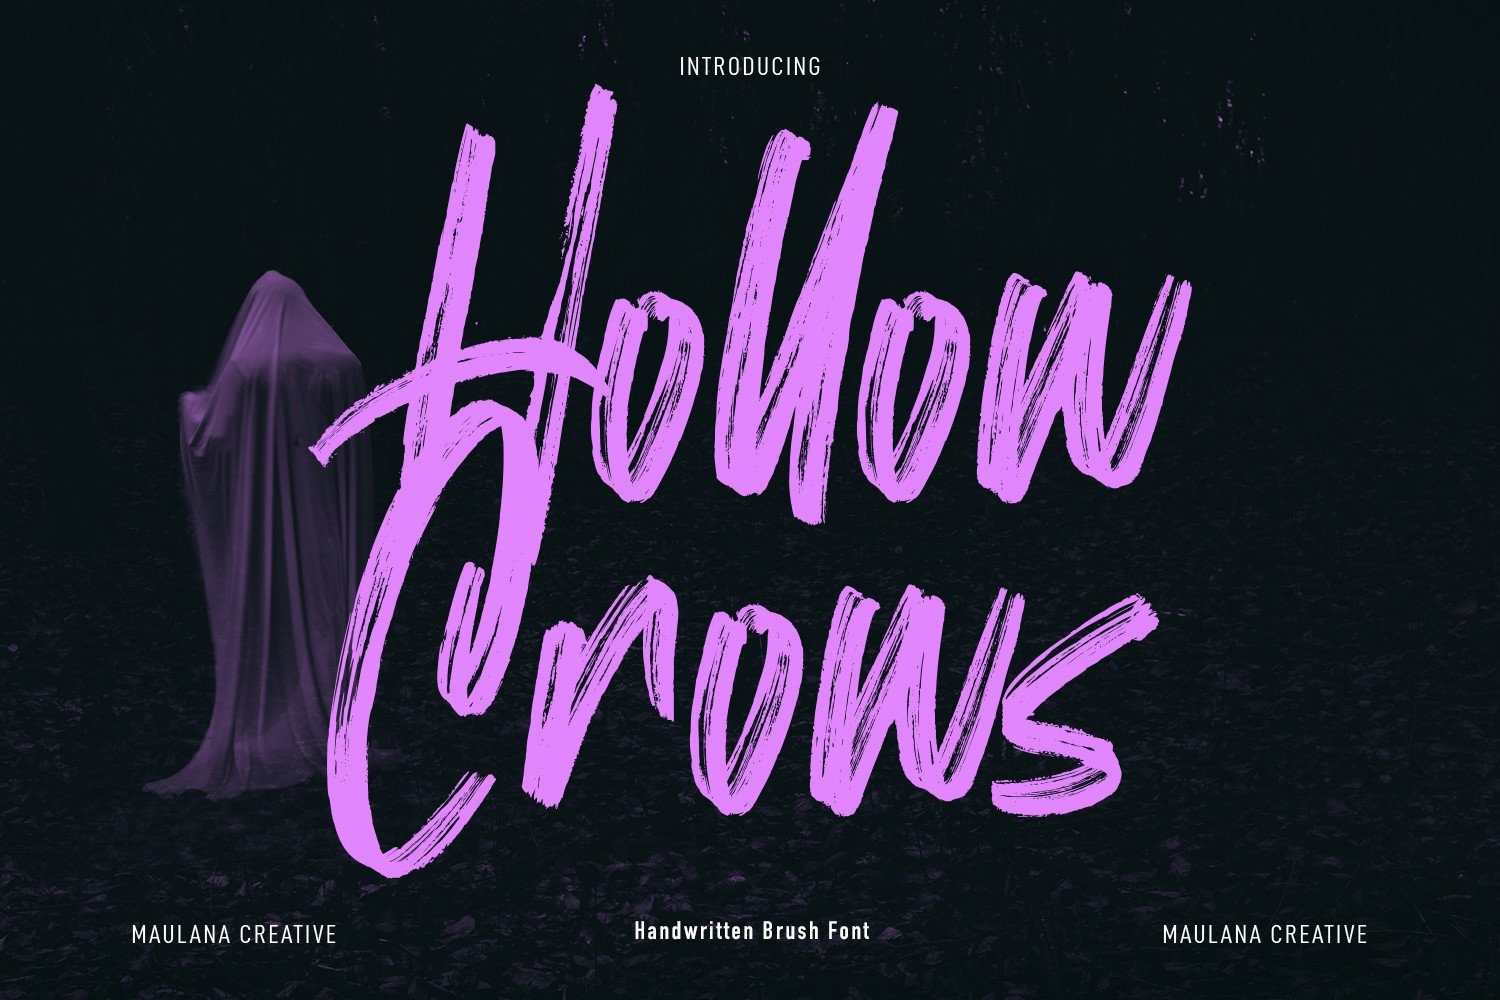 Hollow Crows